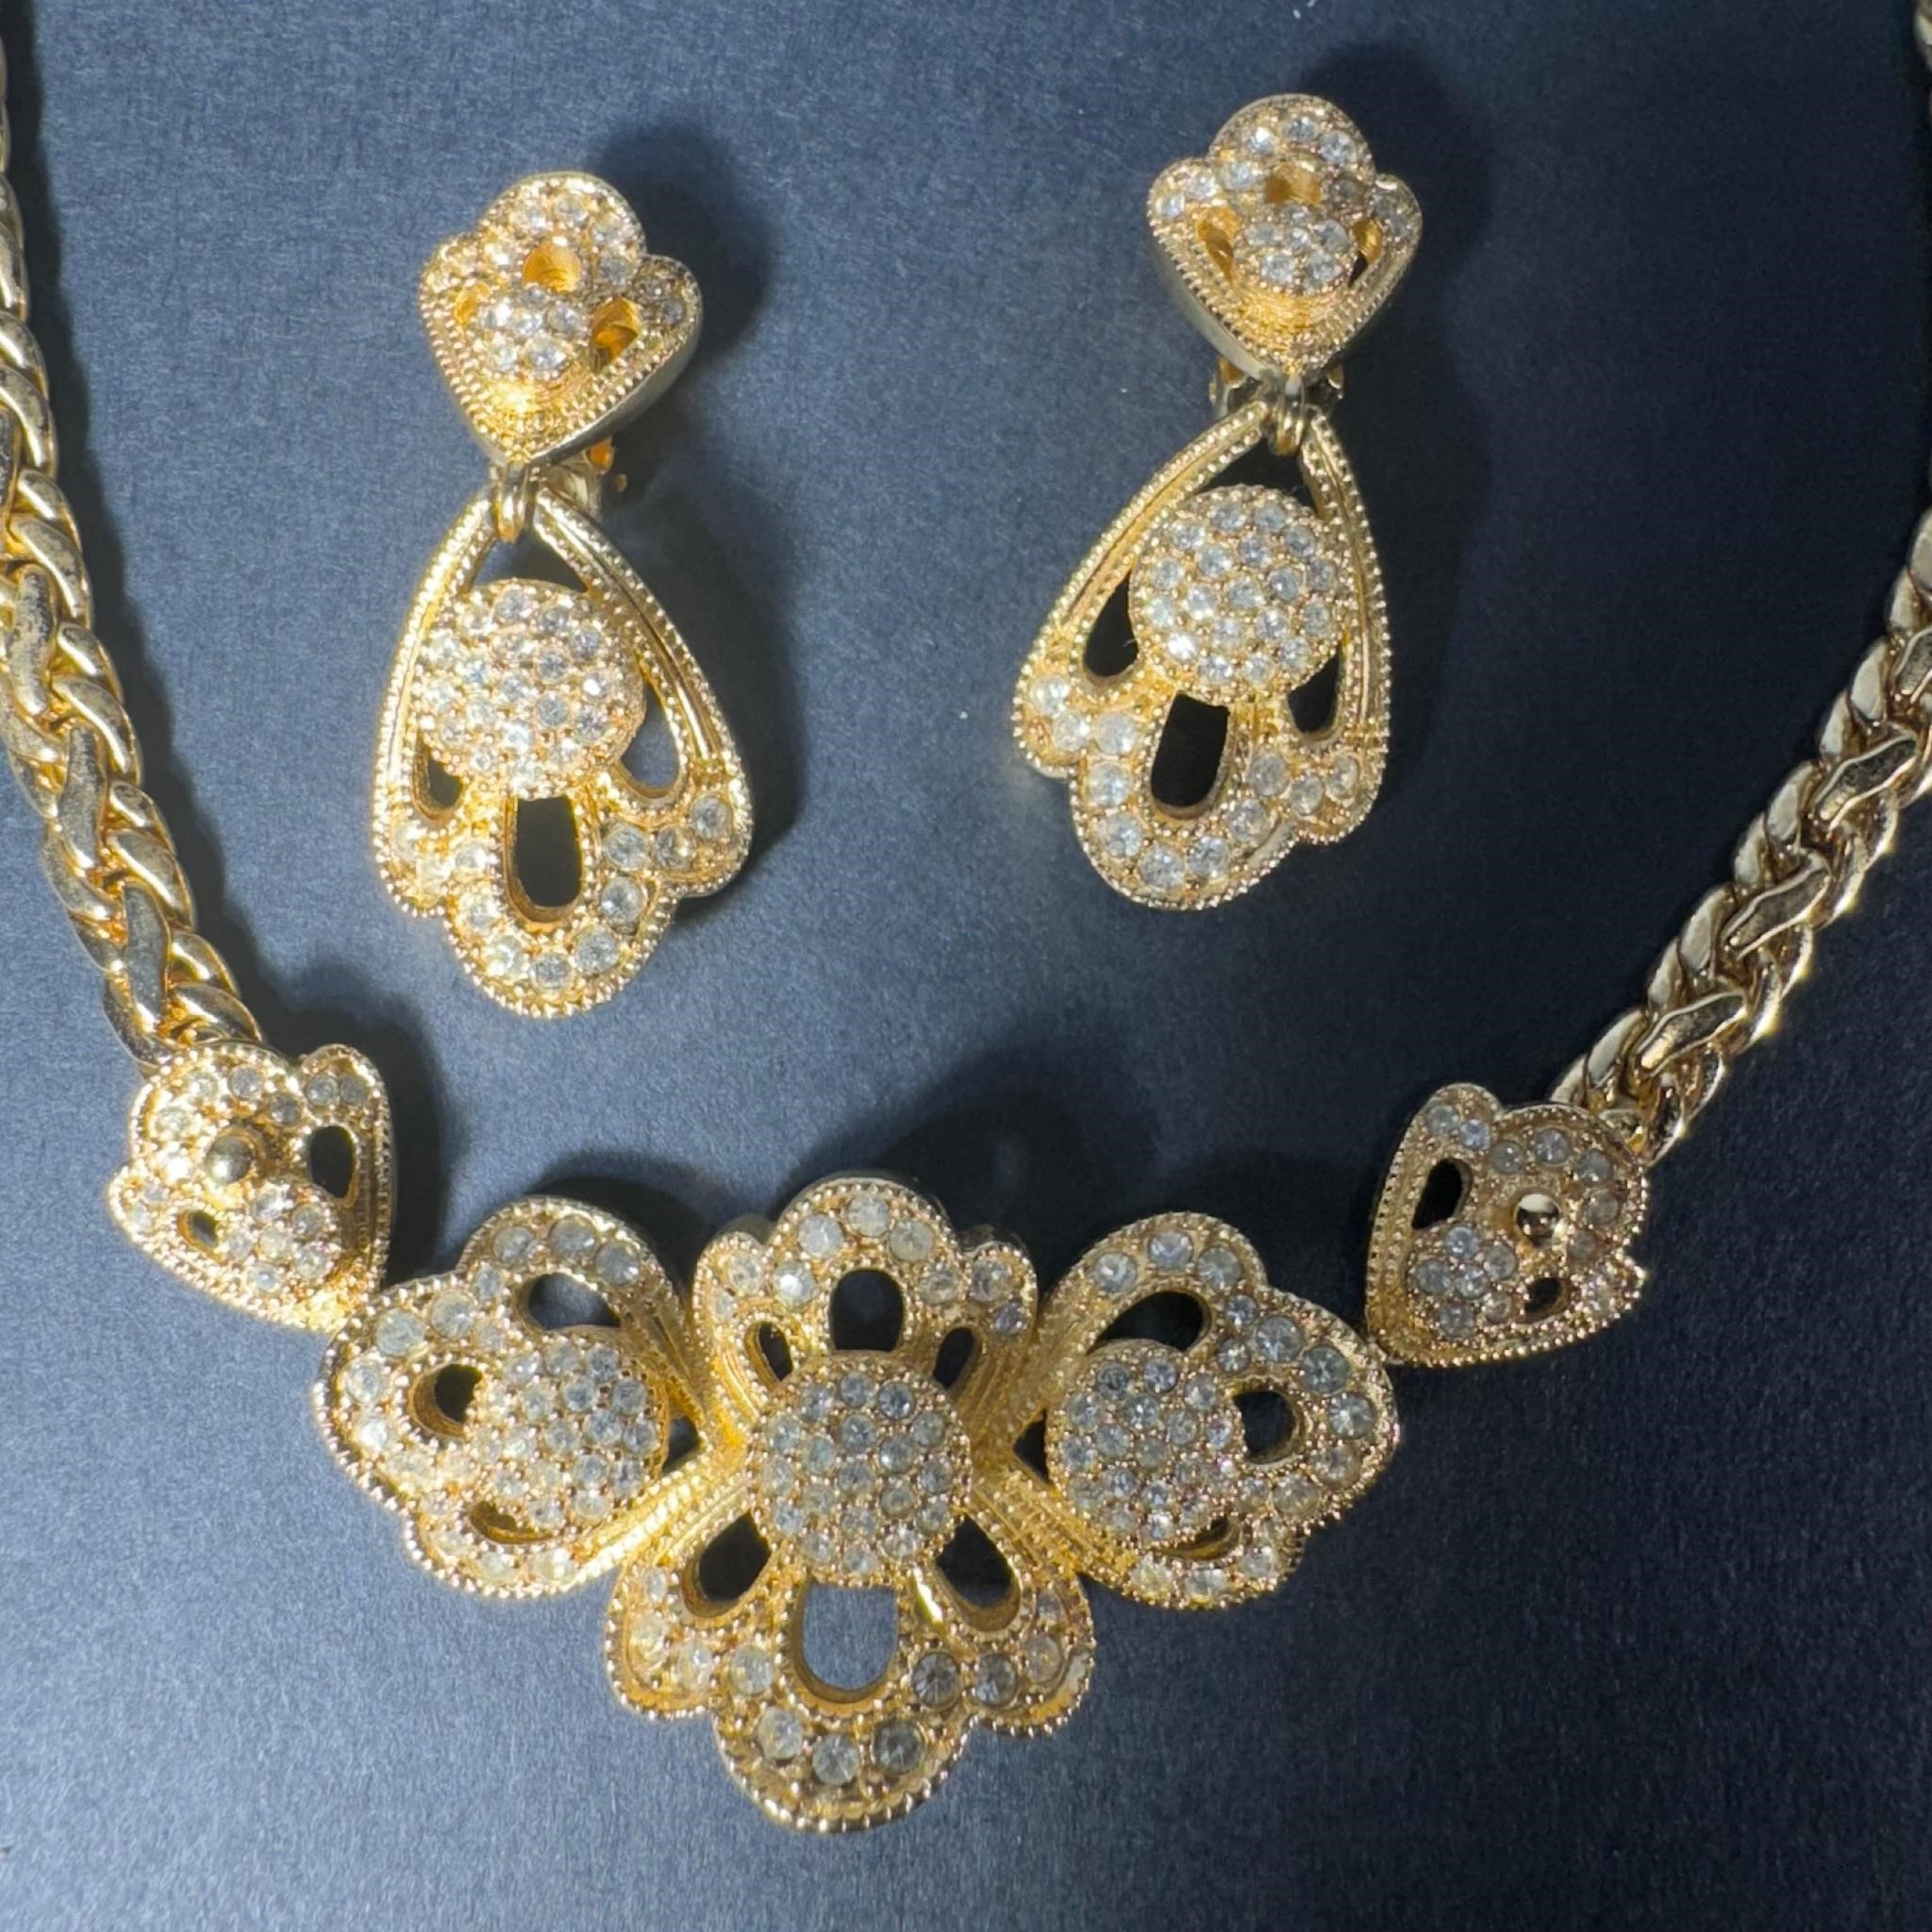 Vintage Christian Dior Necklace and Earring Set